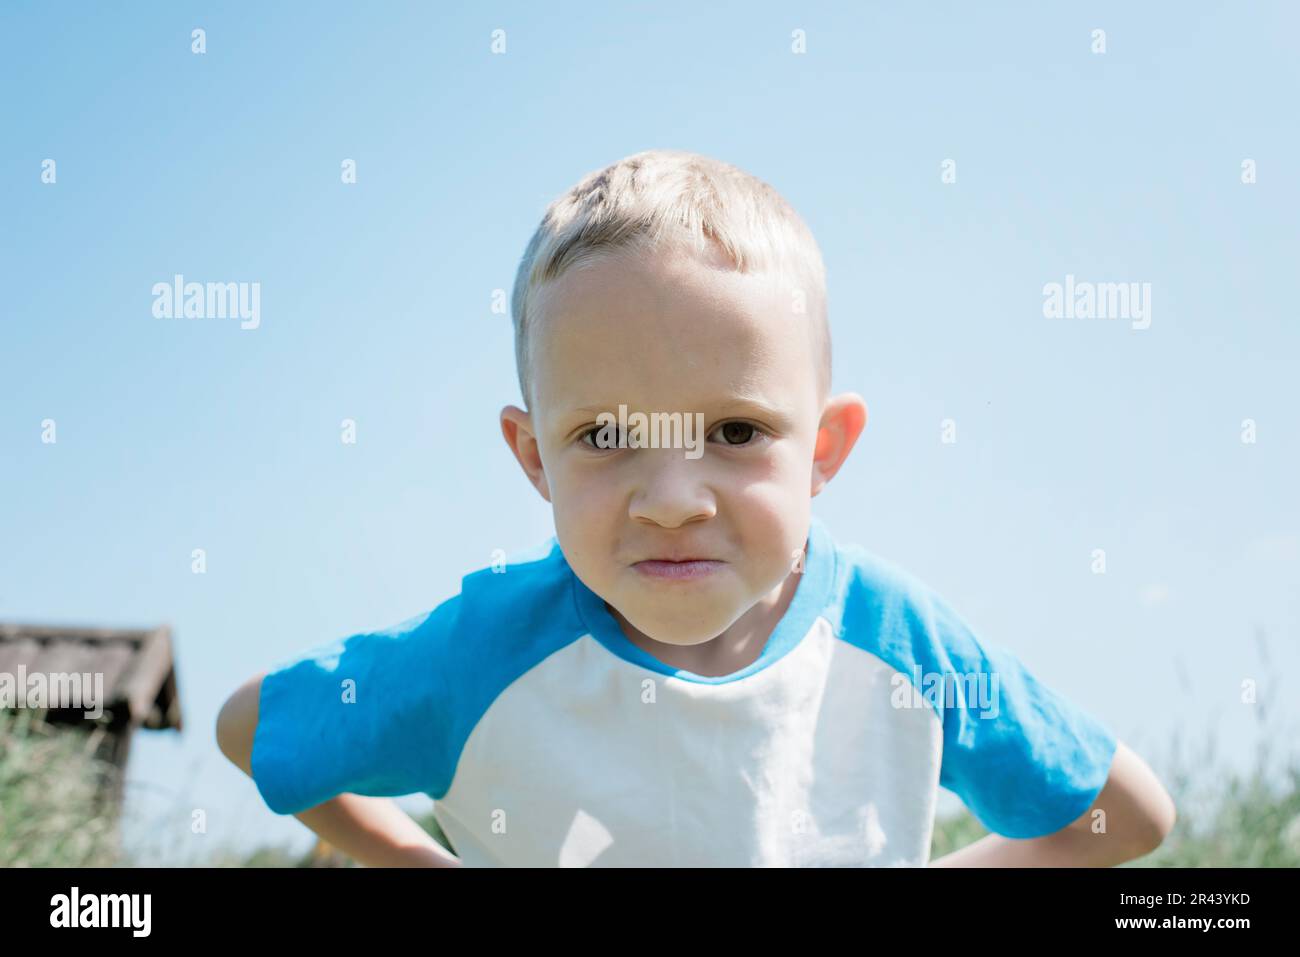 portrait of a young blonde boy looking serious Stock Photo